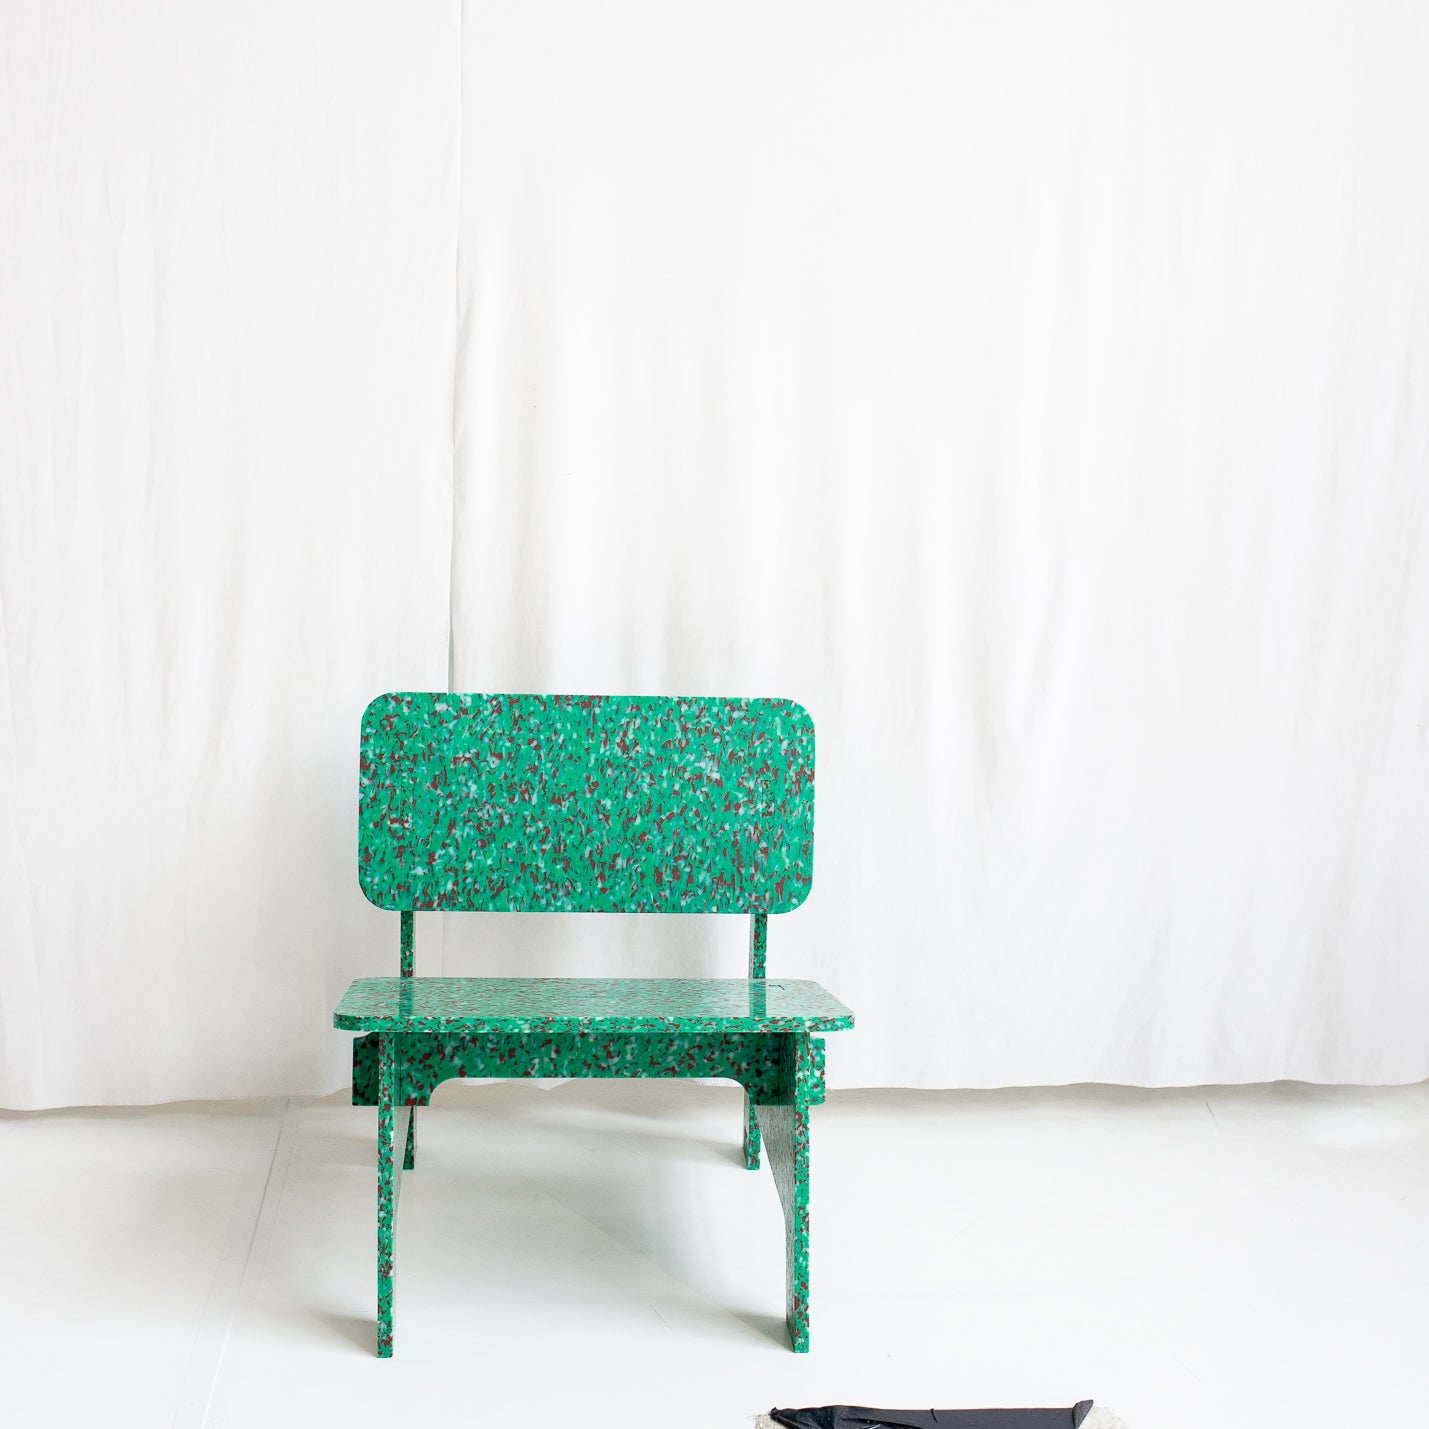 GREEN CHAIR BY THE MINIMONO PROJECT - BRAND FOR ECO FRIENDLY - PLAYFUL - MULTI FUNCTIONAL - SUSTAINABLE - HIGH QUALITY - DESIGN FURNITURE FROM RECYCLED PLASTIC FOR BOTH ADULT AND CHILDREN MADE IN BERLIN GERMANY